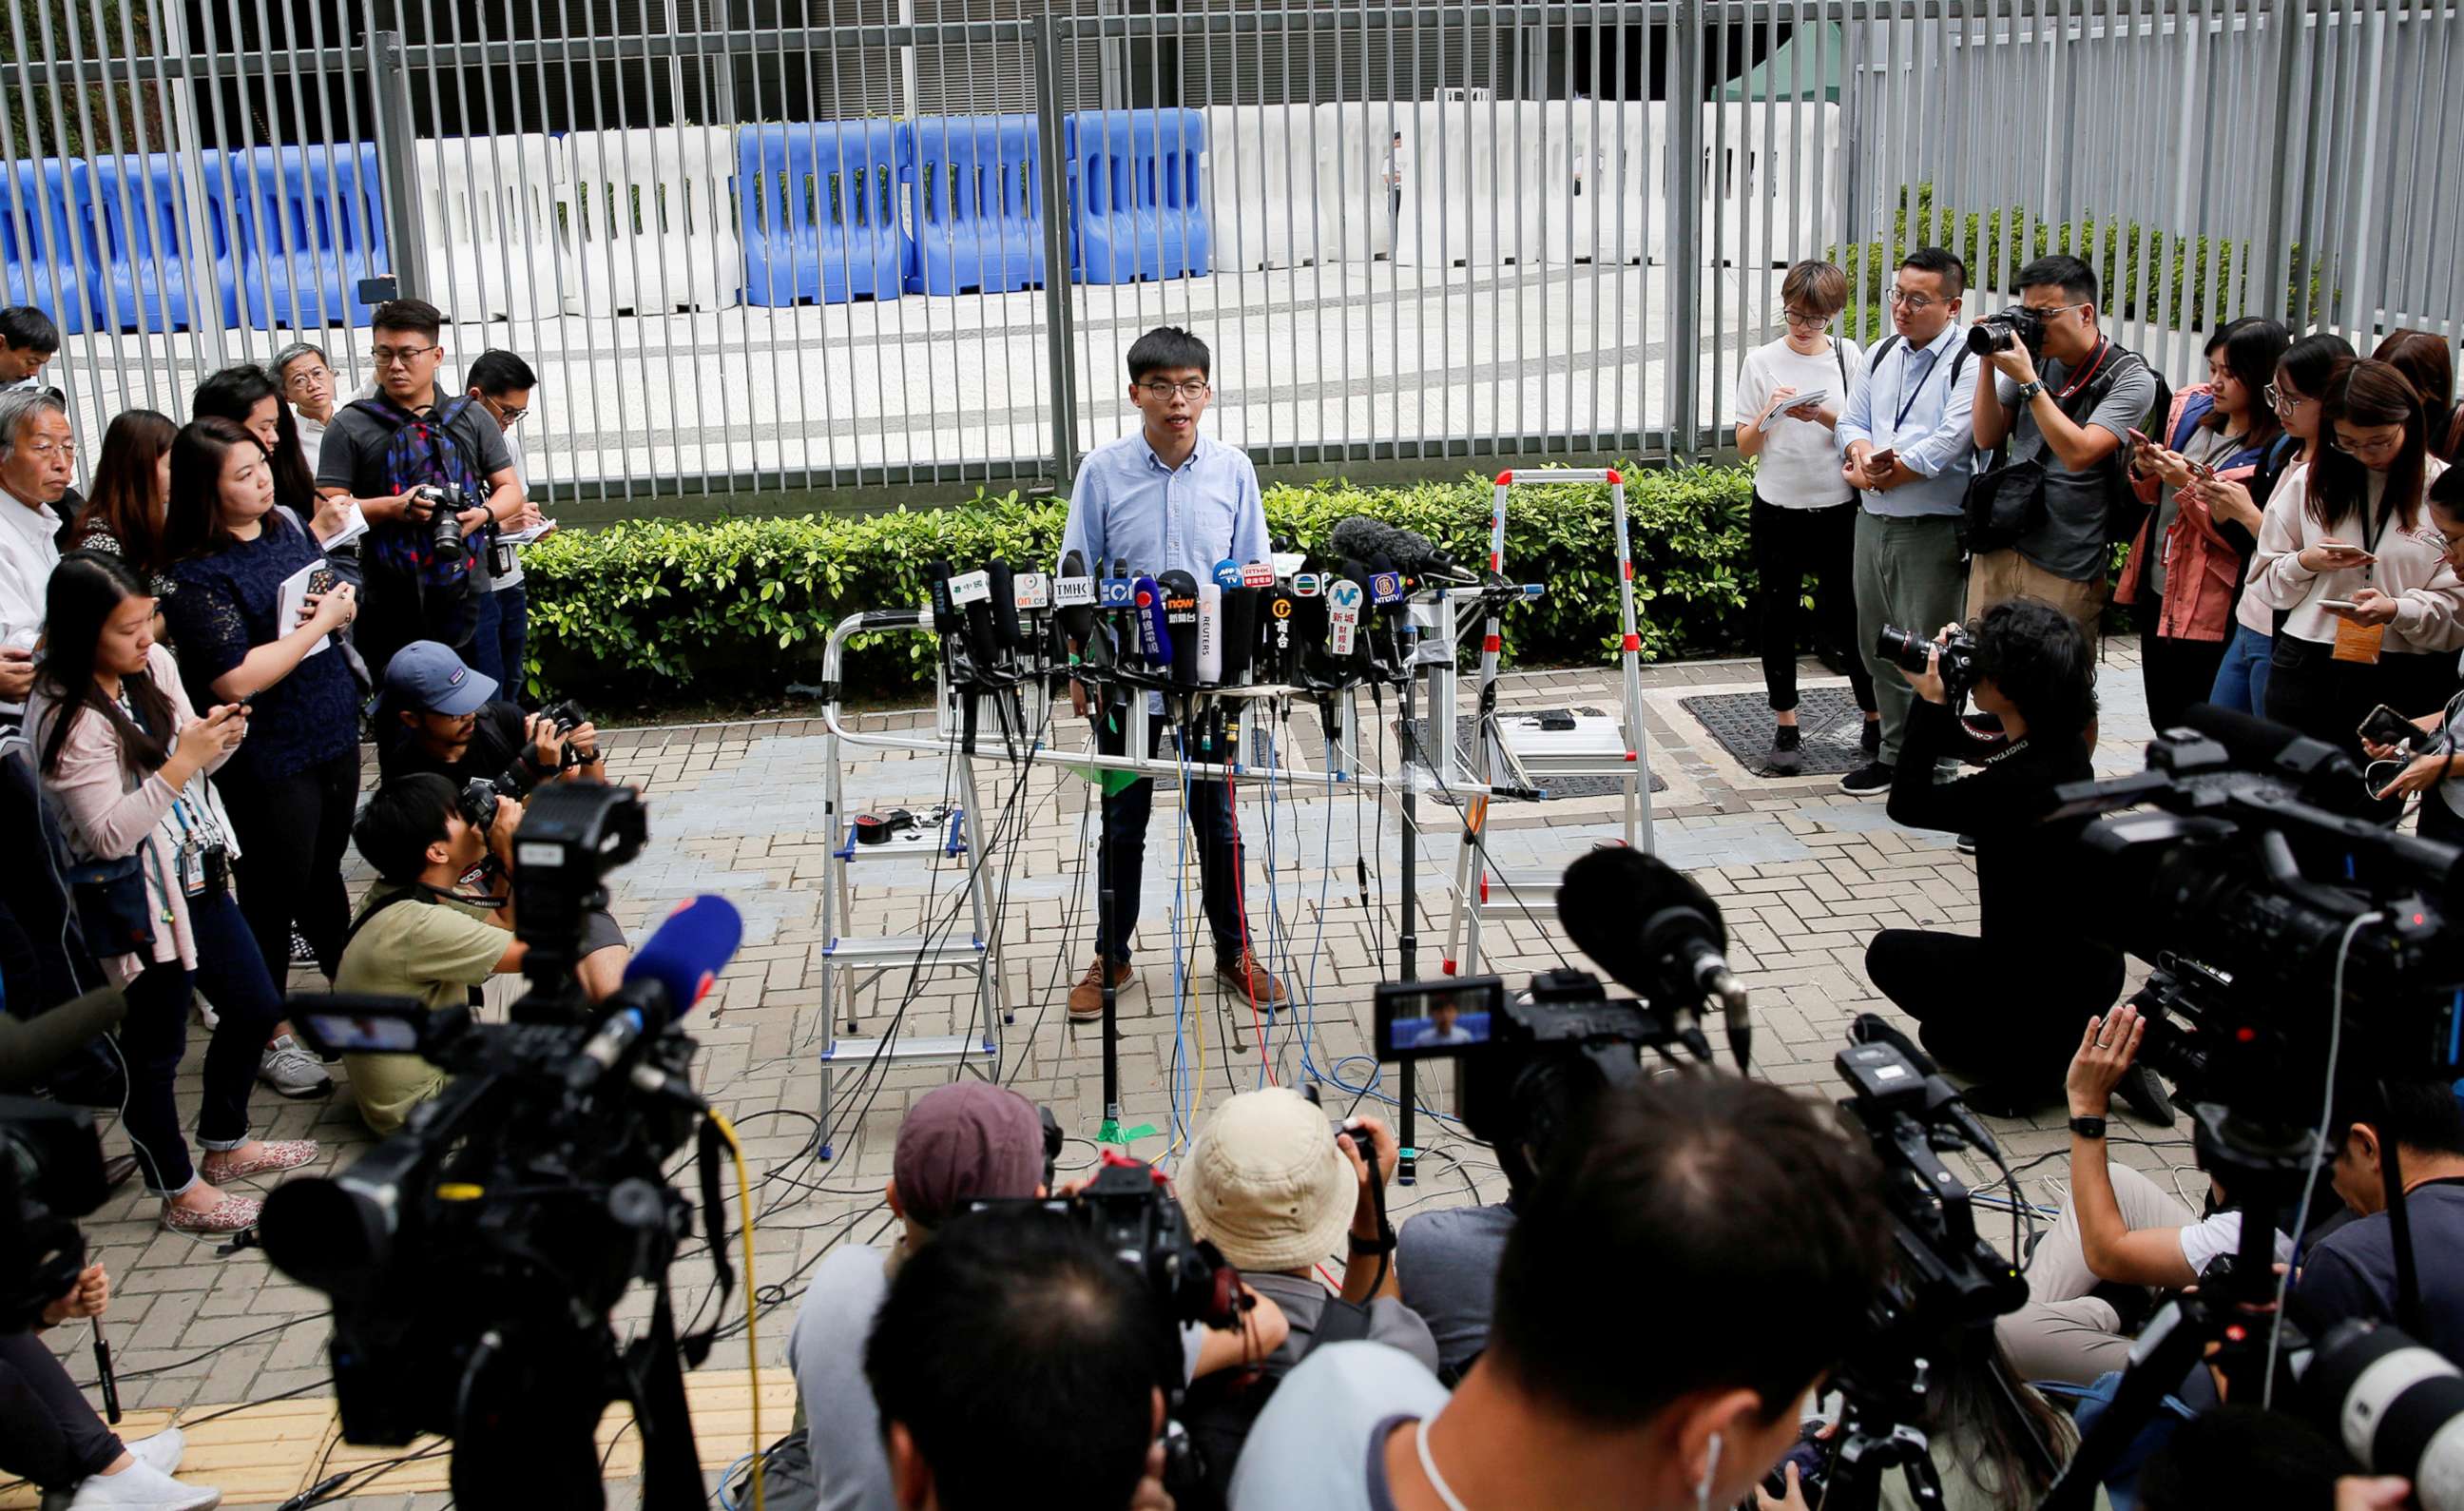 PHOTO: Pro-democracy activist Joshua Wong speaks to journalists after being disqualified from running in November's local district's council elections, in Hong Kong, Oct. 29, 2019.